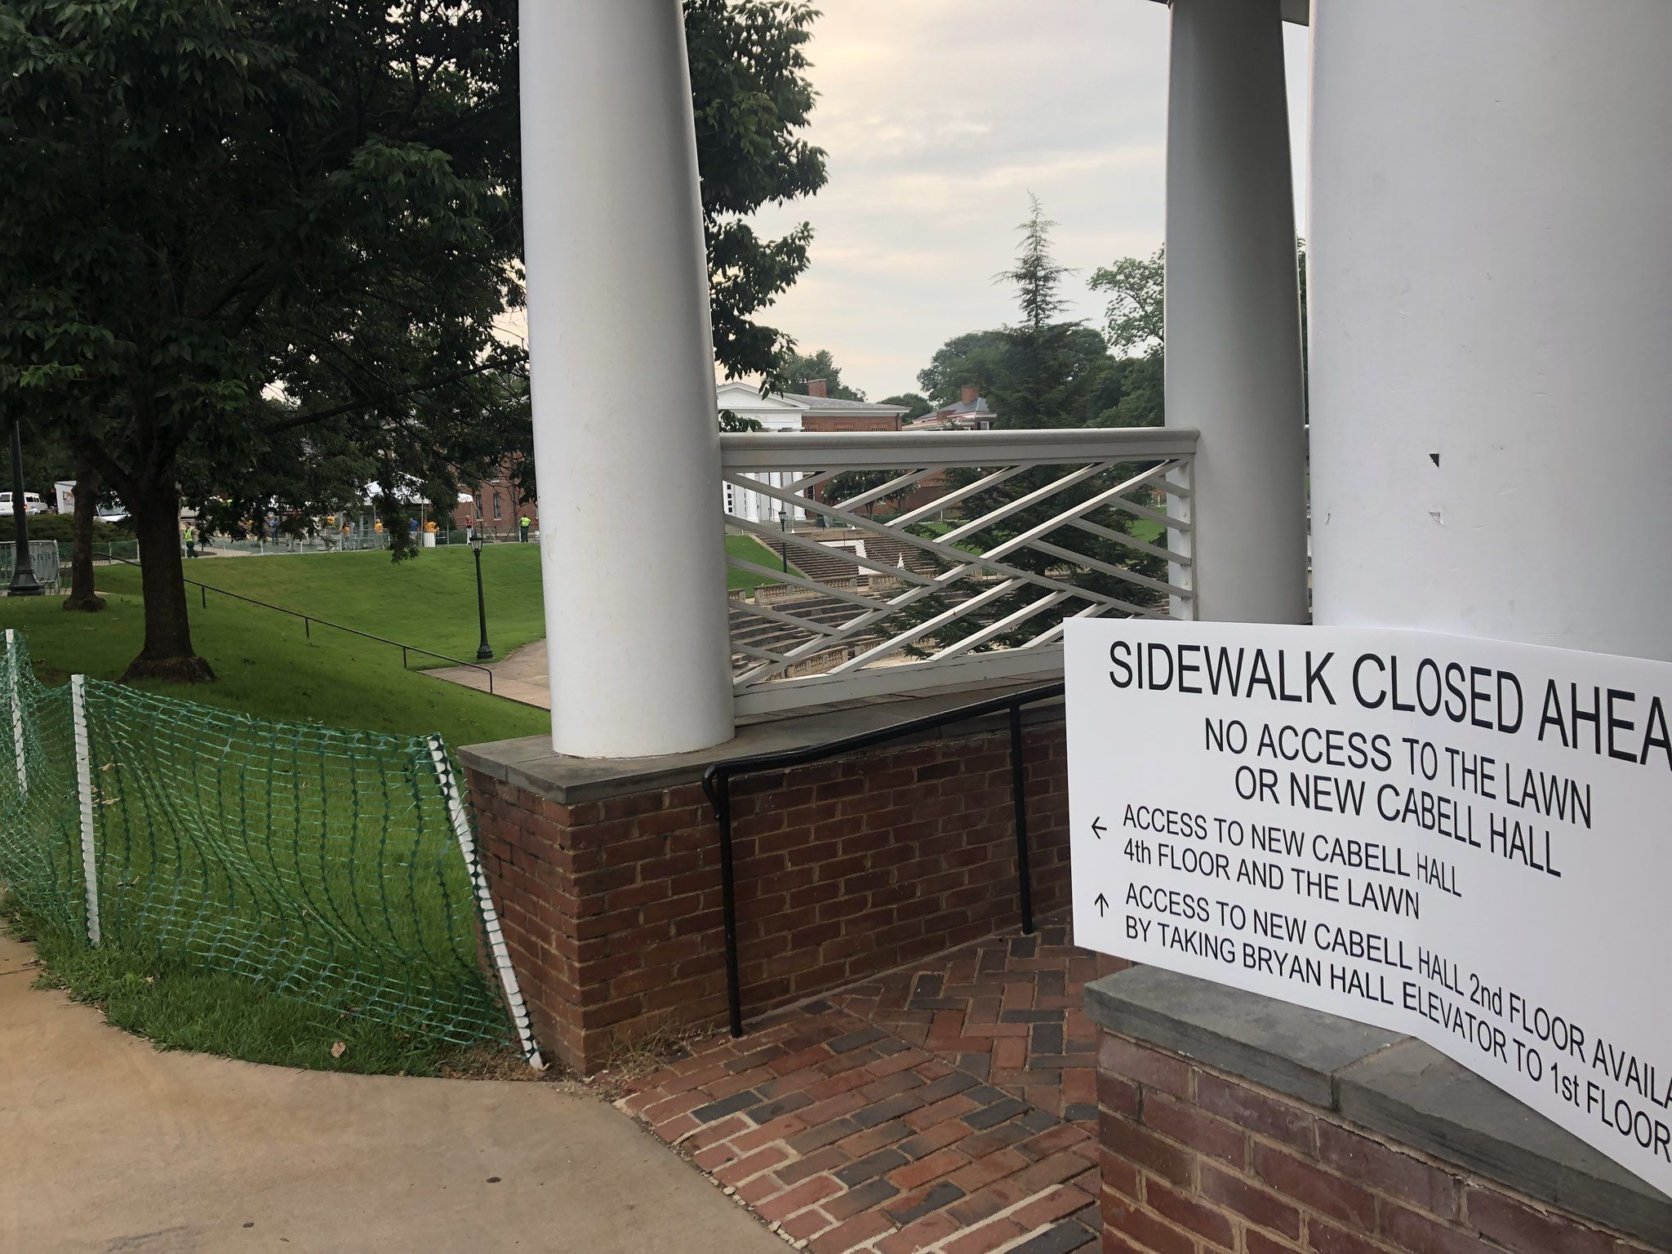 A sign warning visitors that a sidewalk is closed is seen near the amphitheater for Saturday morning's "The Hope that Summons Us" event at the University of Virginia. It comes one year after white supremacists marched through the Grounds with tiki torches, and a day before anniversary of Heather Heyer’s death. (WTOP/Max Smith)